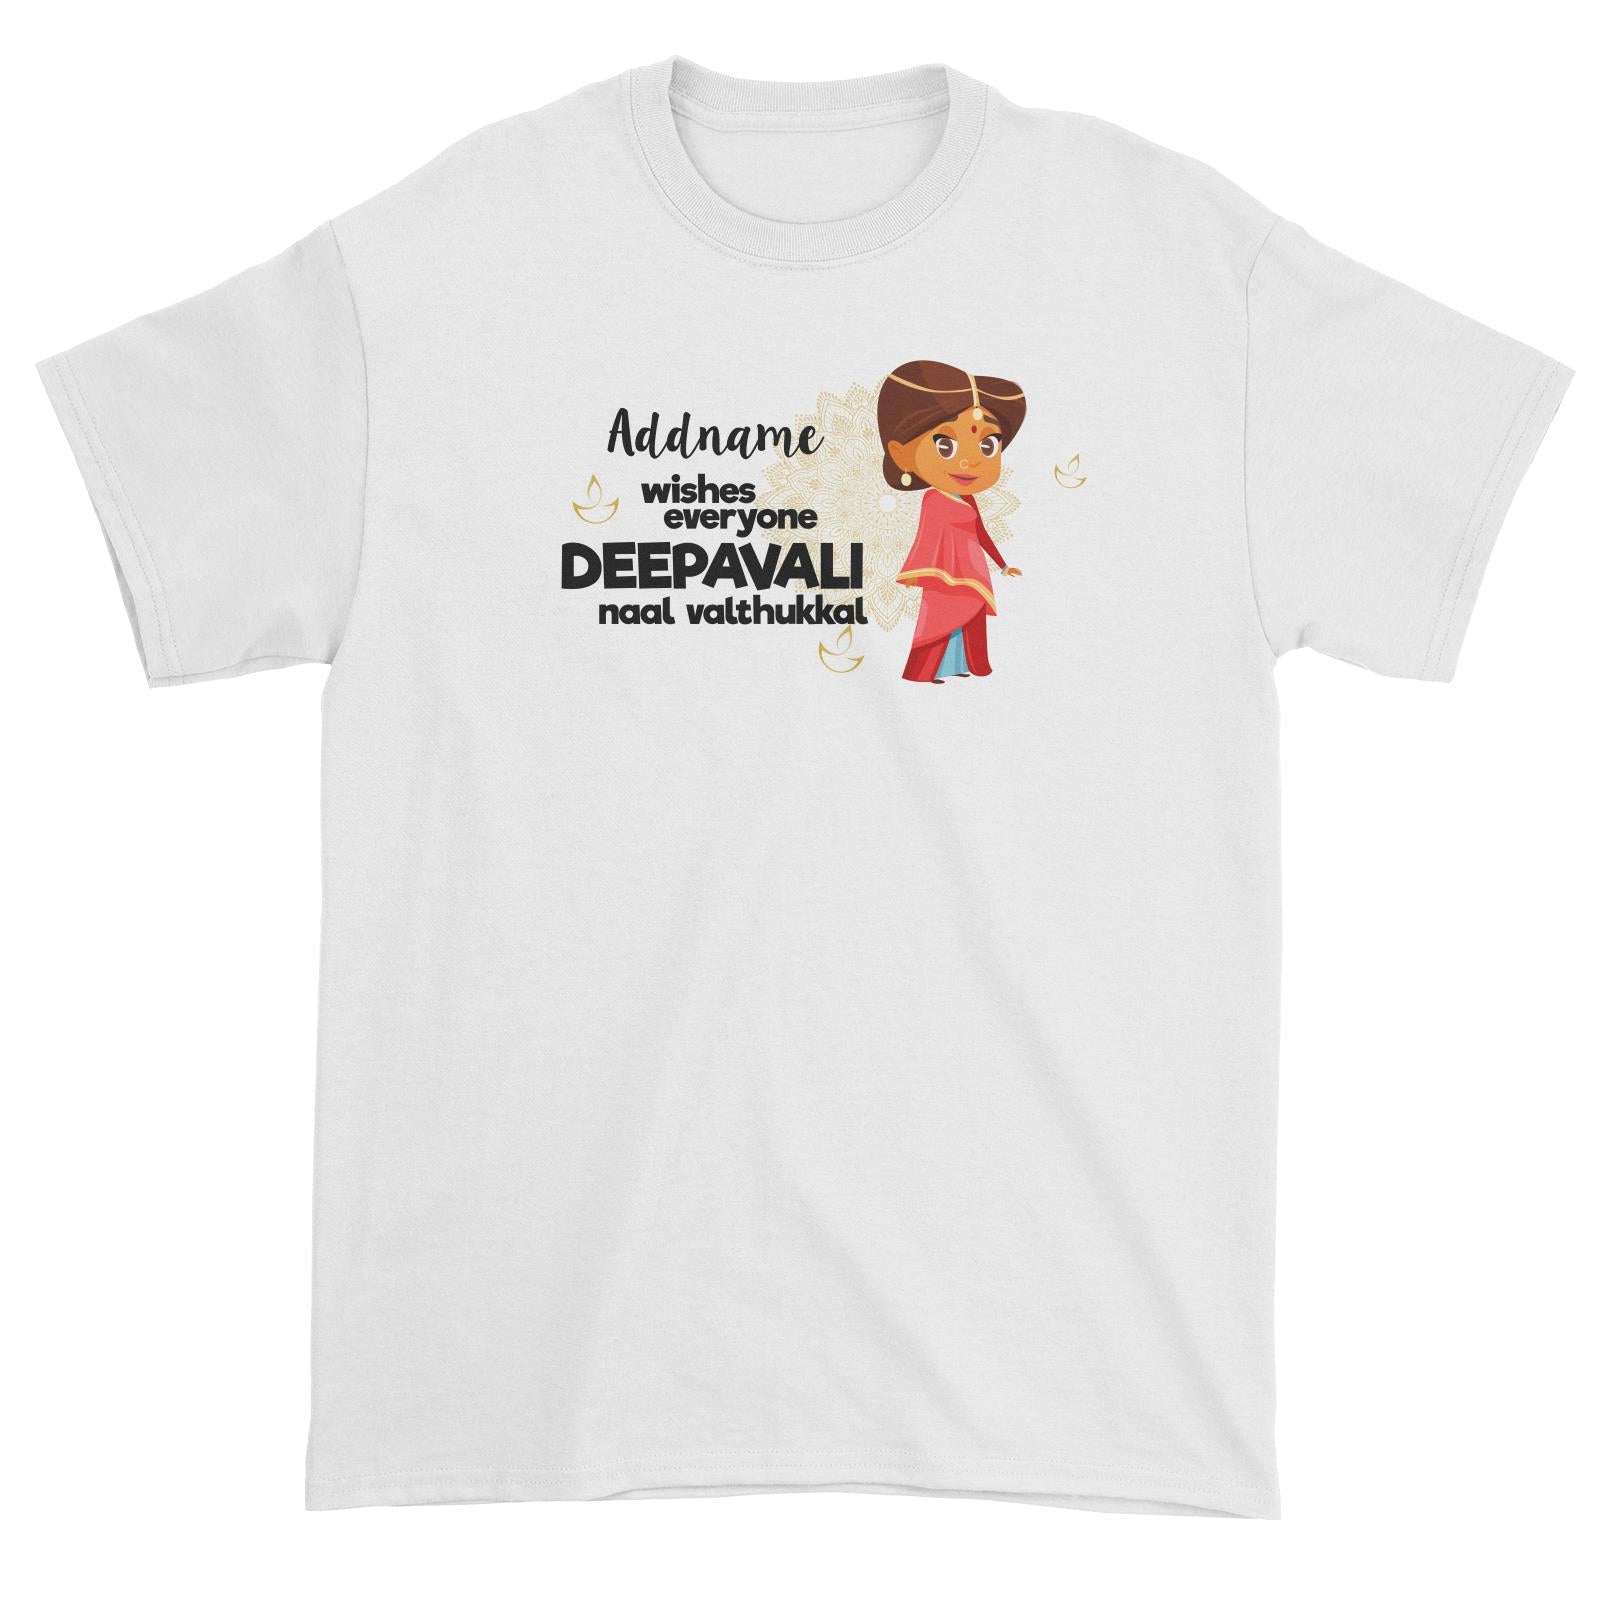 Cute Woman Wishes Everyone Deepavali Addname Unisex T-Shirt